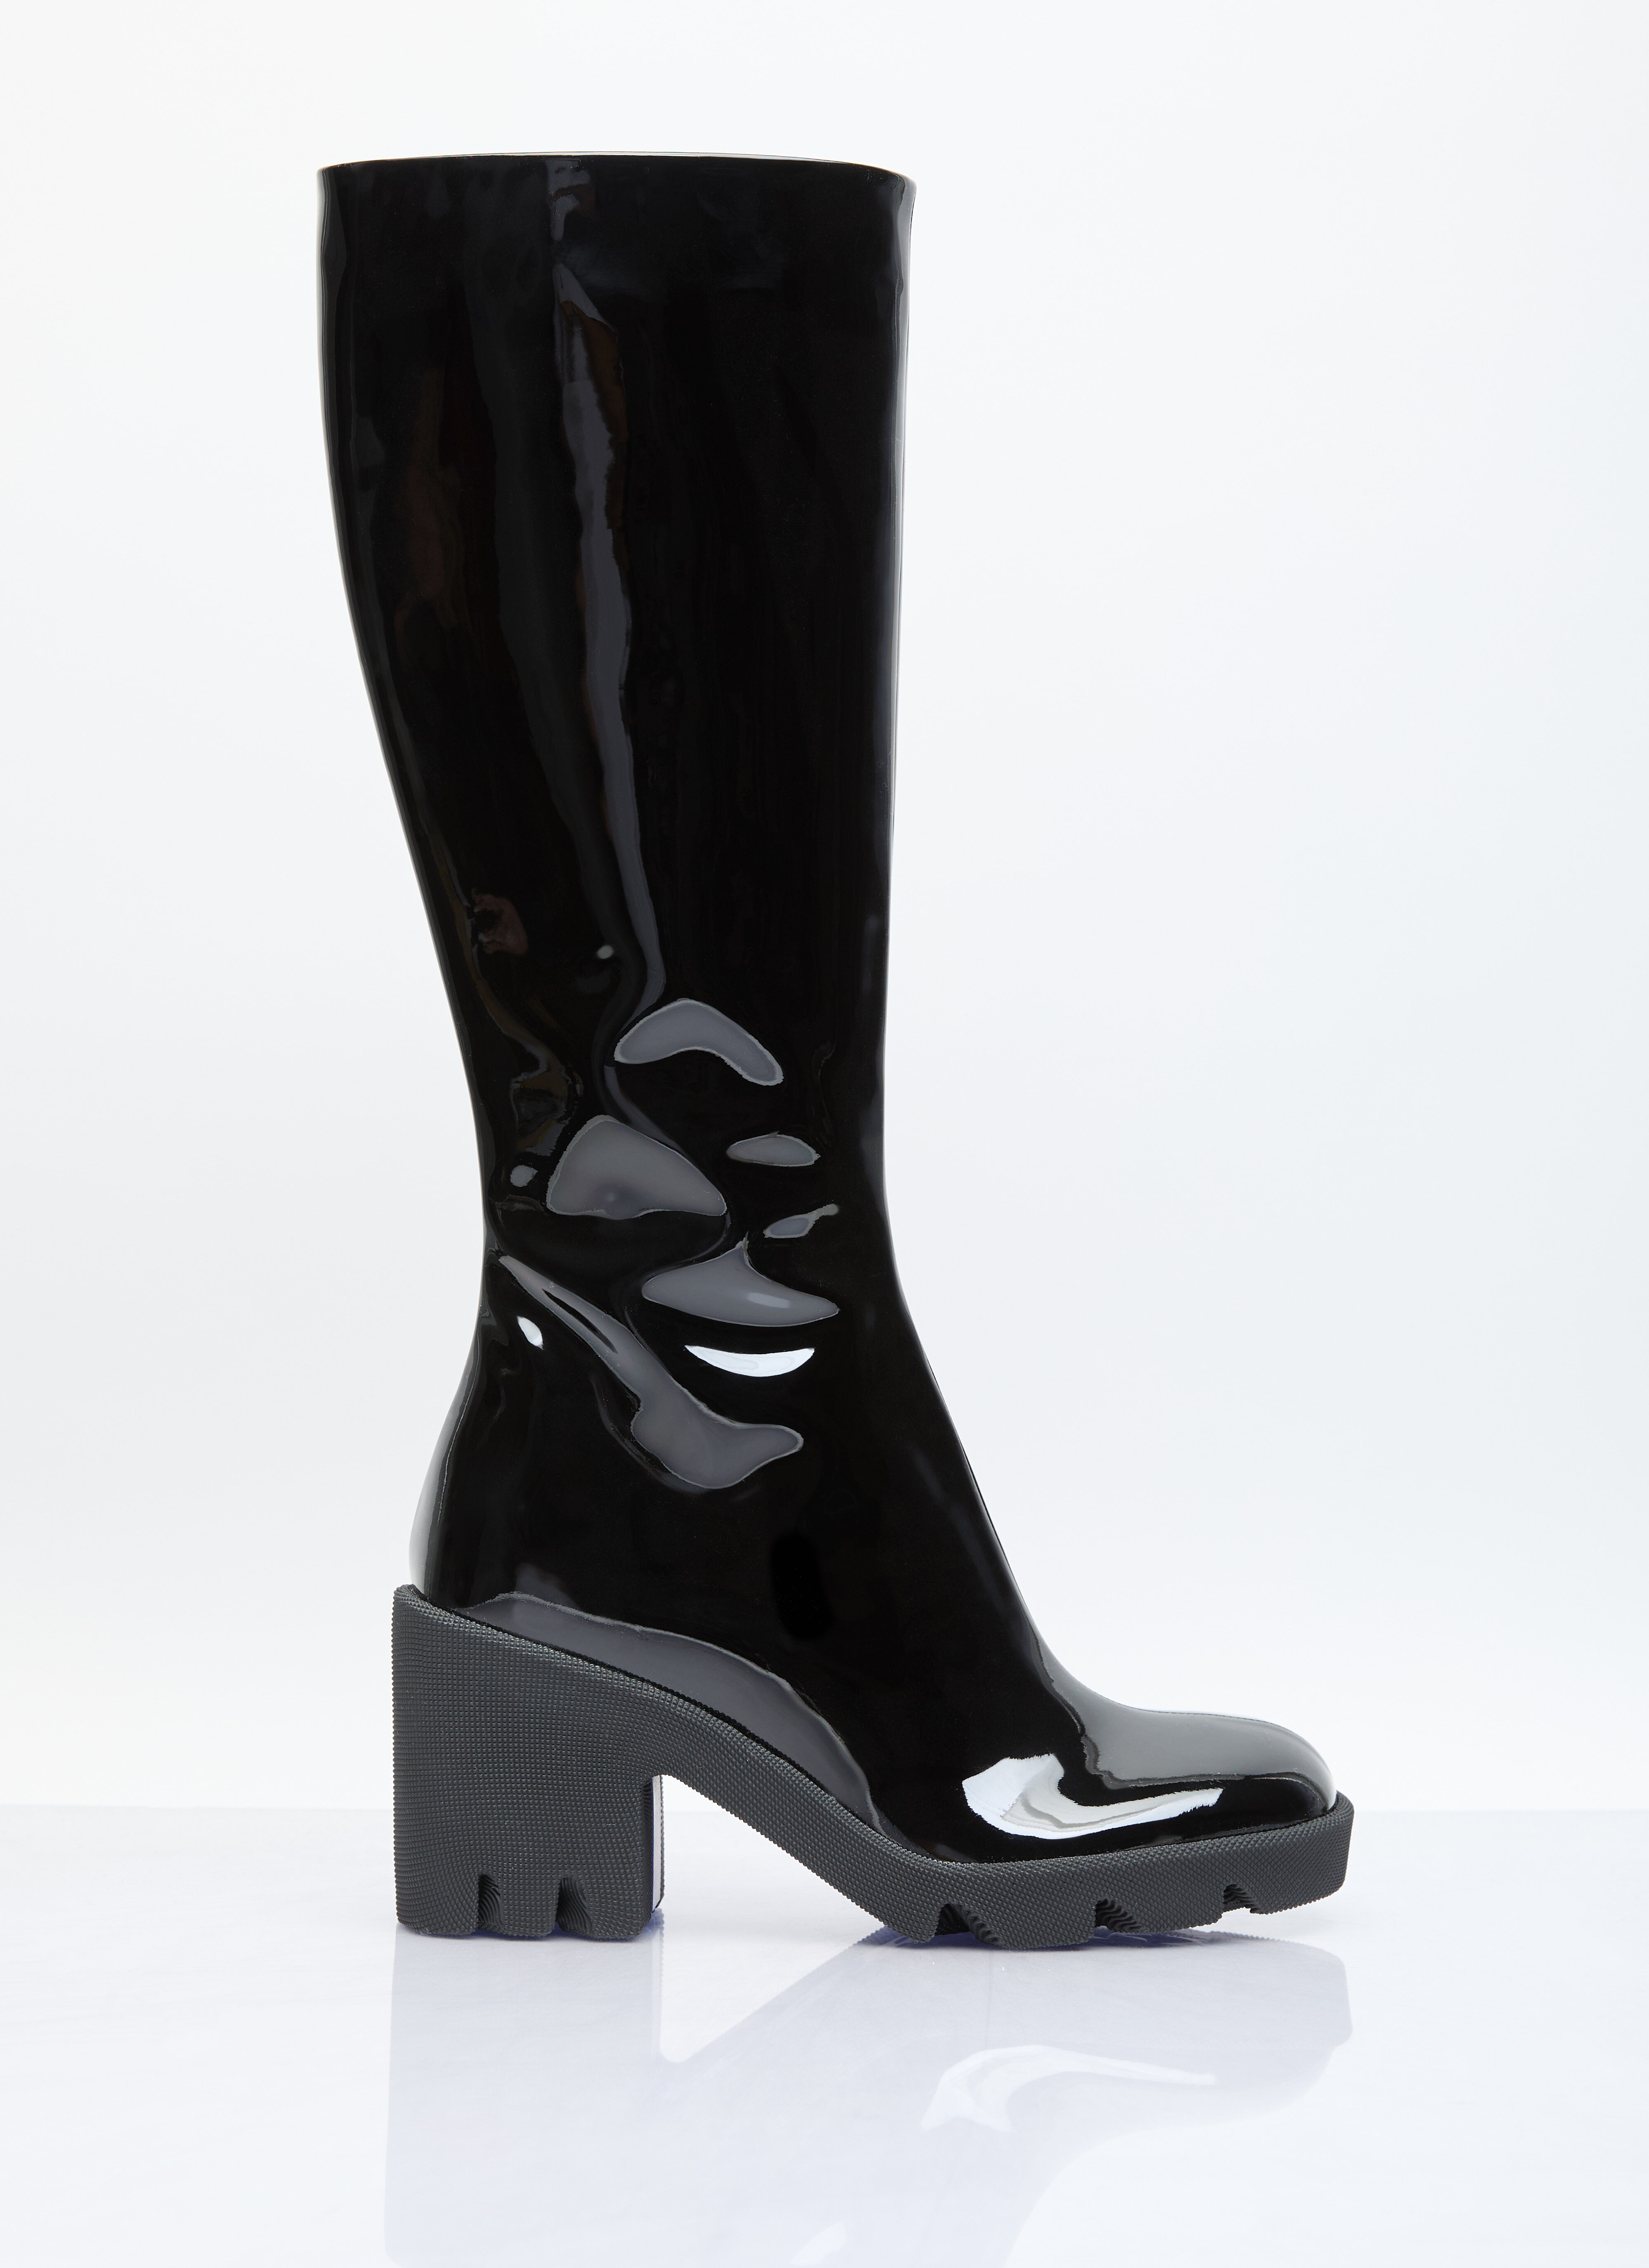 MM6 Maison Margiela Patent Leather Knee High Boots Grey mmm0255019